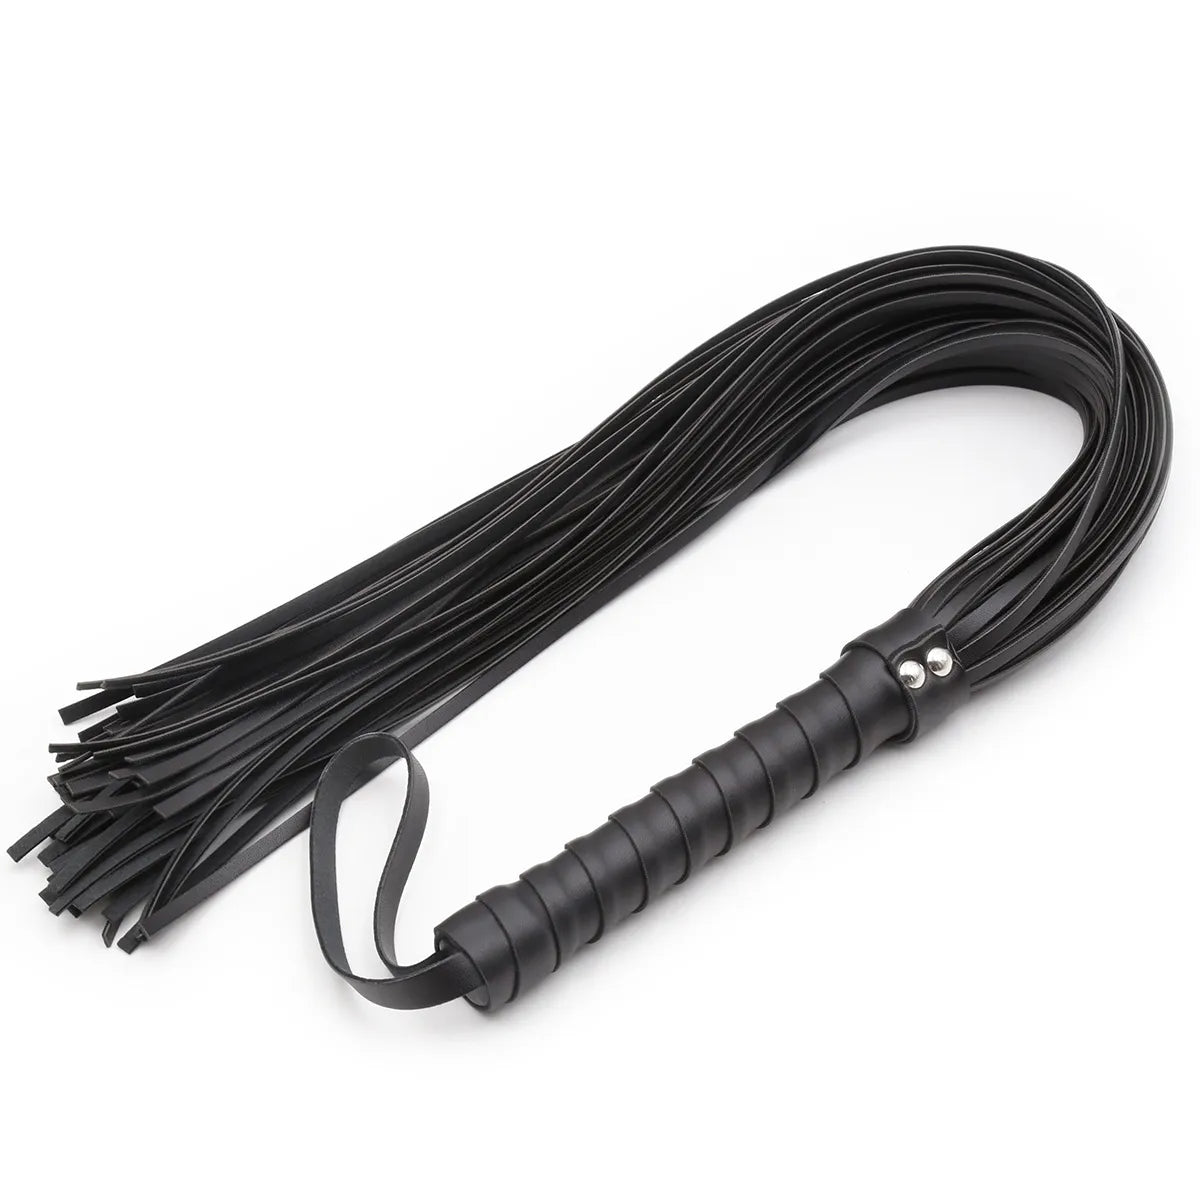 Exotic Accessories Whip Restraint Lingerie